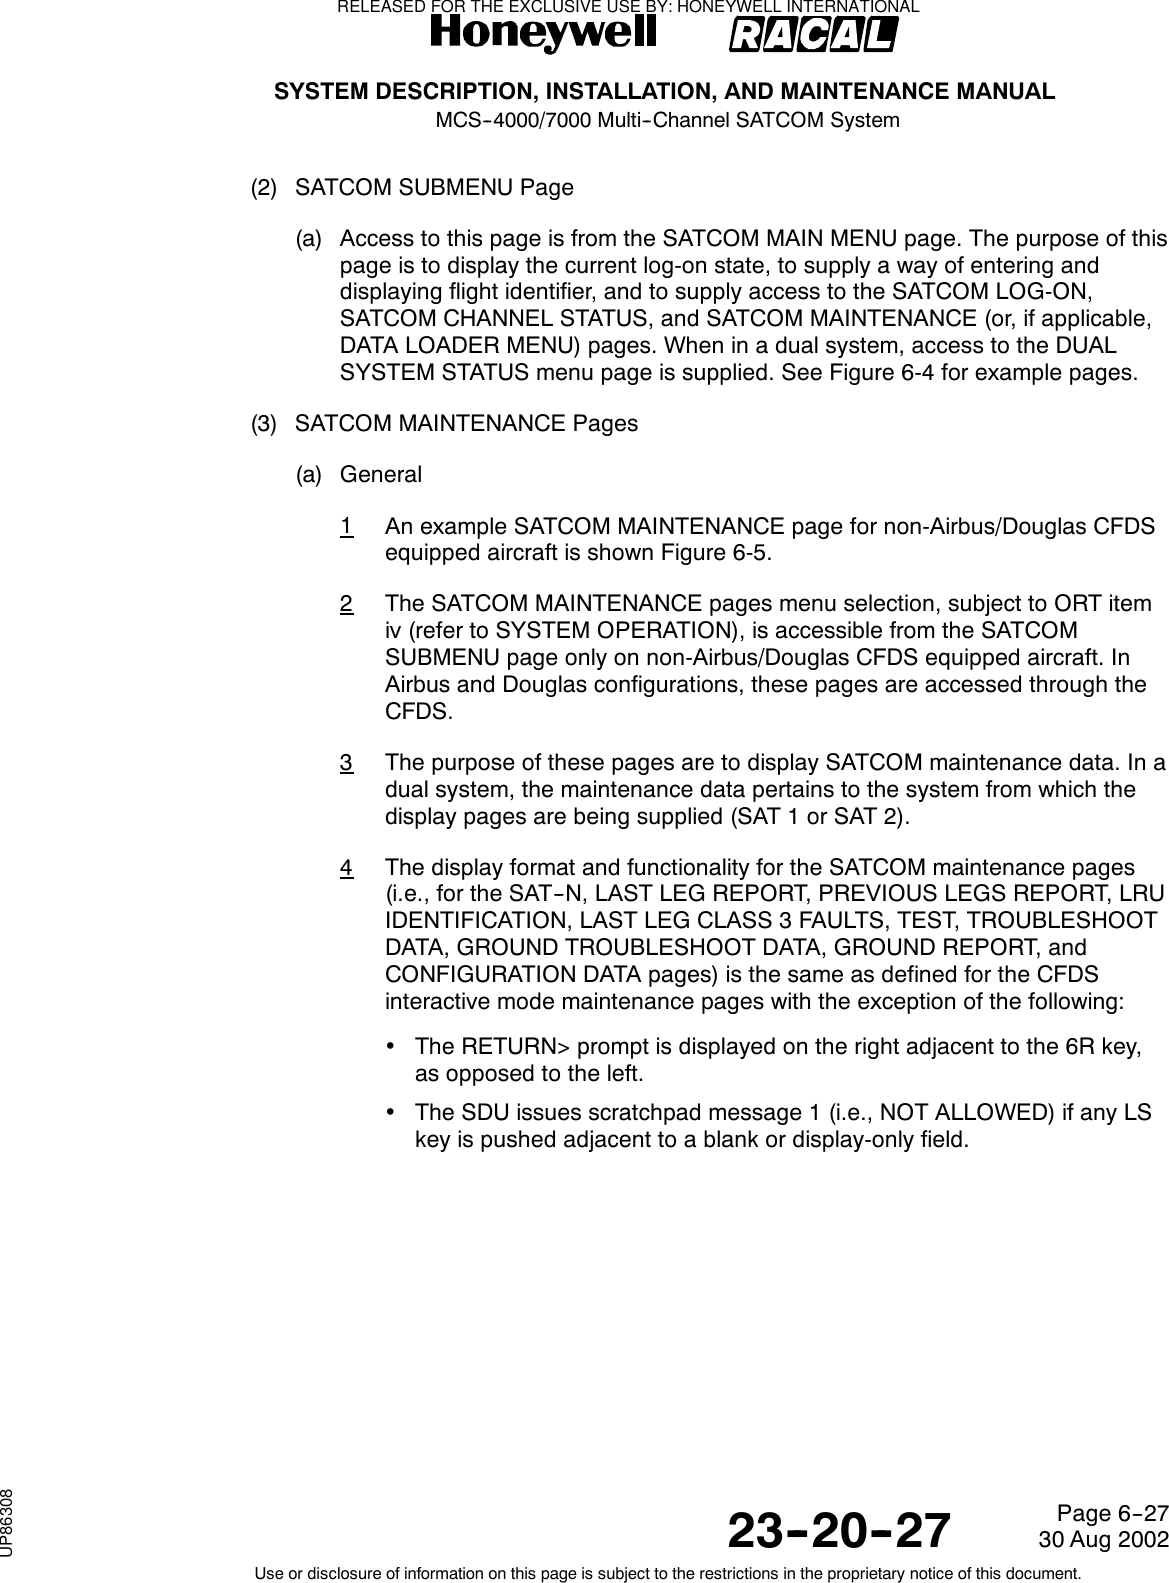 SYSTEM DESCRIPTION, INSTALLATION, AND MAINTENANCE MANUALMCS--4000/7000 Multi--Channel SATCOM System23--20--2730 Aug 2002Use or disclosure of information on this page is subject to the restrictions in the proprietary notice of this document.Page 6--27(2) SATCOM SUBMENU Page(a) Access to this page is from the SATCOM MAIN MENU page. The purpose of thispage is to display the current log-on state, to supply a way of entering anddisplaying flight identifier, and to supply access to the SATCOM LOG-ON,SATCOM CHANNEL STATUS, and SATCOM MAINTENANCE (or, if applicable,DATA LOADER MENU) pages. When in a dual system, access to the DUALSYSTEM STATUS menu page is supplied. See Figure 6-4 for example pages.(3) SATCOM MAINTENANCE Pages(a) General1An example SATCOM MAINTENANCE page for non-Airbus/Douglas CFDSequipped aircraft is shown Figure 6-5.2The SATCOM MAINTENANCE pages menu selection, subject to ORT itemiv (refer to SYSTEM OPERATION), is accessible from the SATCOMSUBMENU page only on non-Airbus/Douglas CFDS equipped aircraft. InAirbus and Douglas configurations, these pages are accessed through theCFDS.3The purpose of these pages are to display SATCOM maintenance data. In adual system, the maintenance data pertains to the system from which thedisplay pages are being supplied (SAT 1 or SAT 2).4The display format and functionality for the SATCOM maintenance pages(i.e., for the SAT--N, LAST LEG REPORT, PREVIOUS LEGS REPORT, LRUIDENTIFICATION, LAST LEG CLASS 3 FAULTS, TEST, TROUBLESHOOTDATA, GROUND TROUBLESHOOT DATA, GROUND REPORT, andCONFIGURATION DATA pages) is the same as defined for the CFDSinteractive mode maintenance pages with the exception of the following:•The RETURN&gt; prompt is displayed on the right adjacent to the 6R key,as opposed to the left.•The SDU issues scratchpad message 1 (i.e., NOT ALLOWED) if any LSkey is pushed adjacent to a blank or display-only field.RELEASED FOR THE EXCLUSIVE USE BY: HONEYWELL INTERNATIONALUP86308